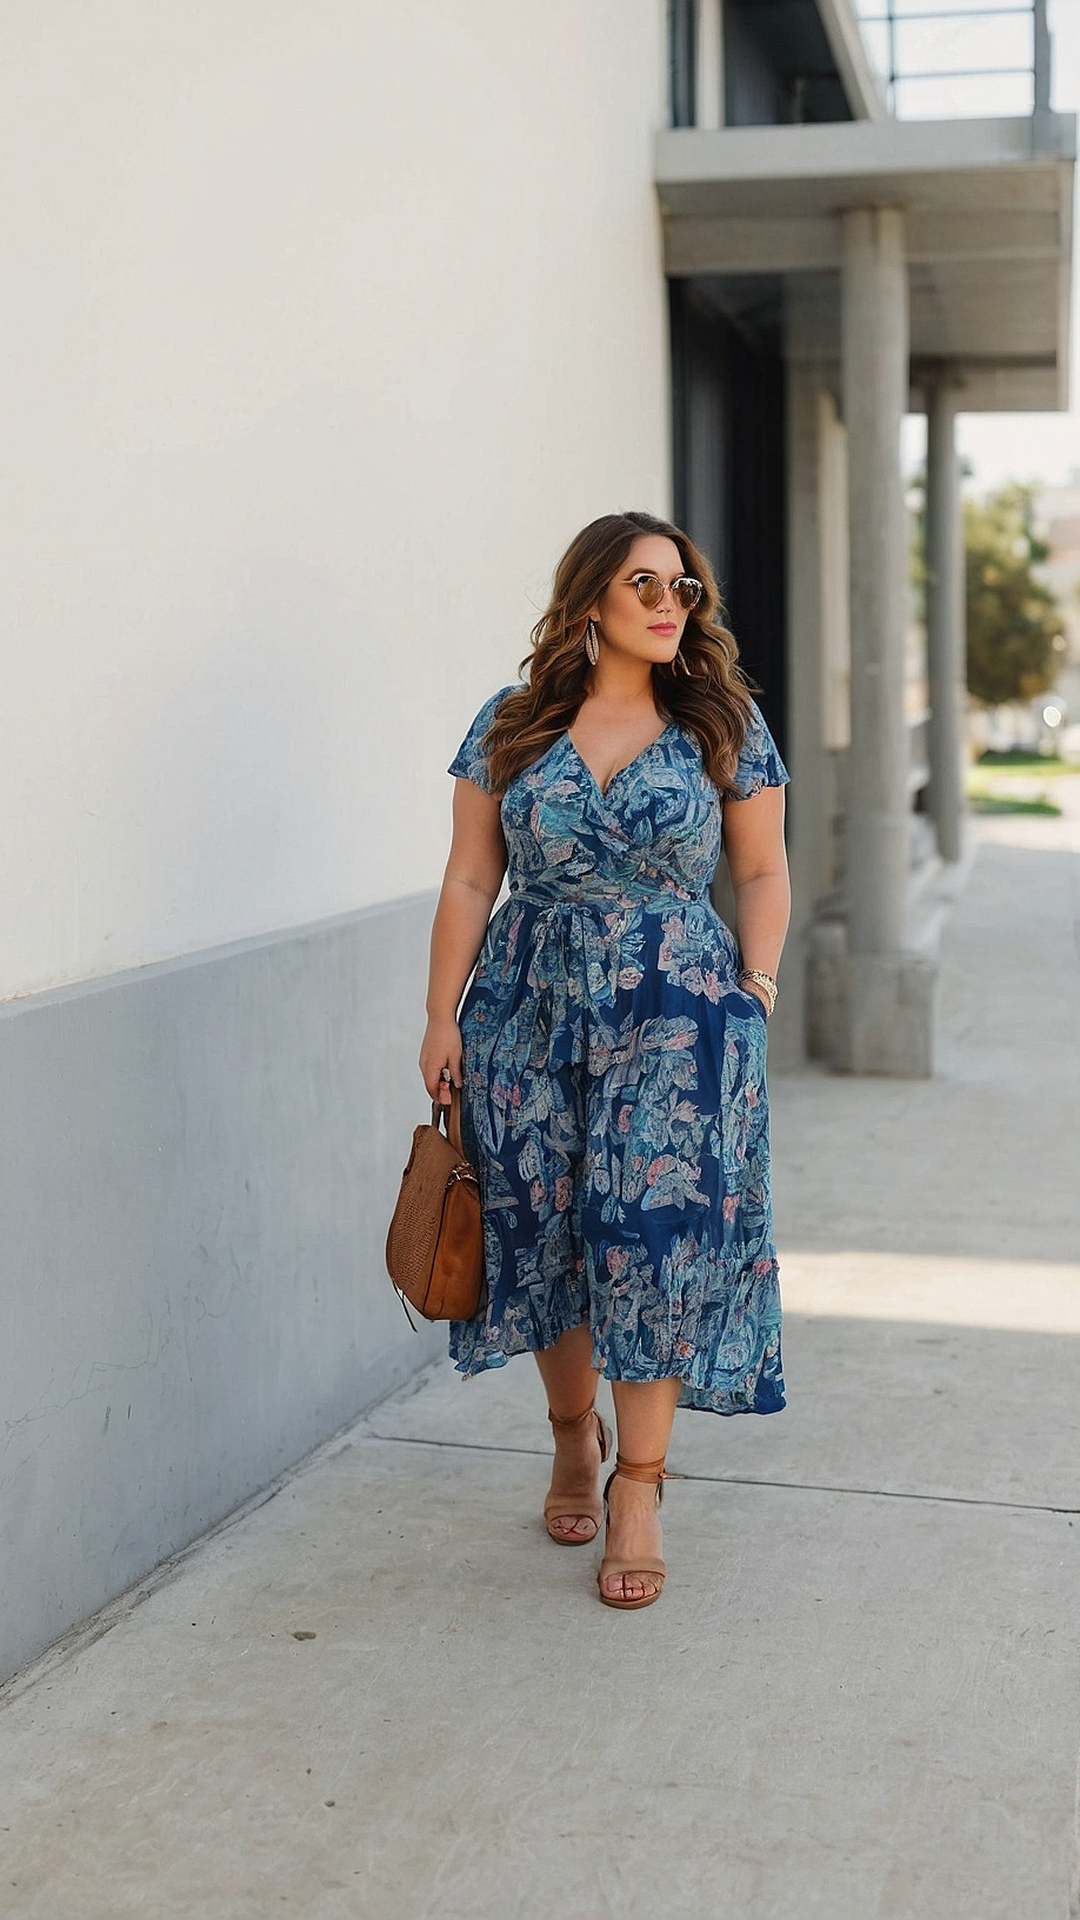 Plus Size Festival Outfits for Summer